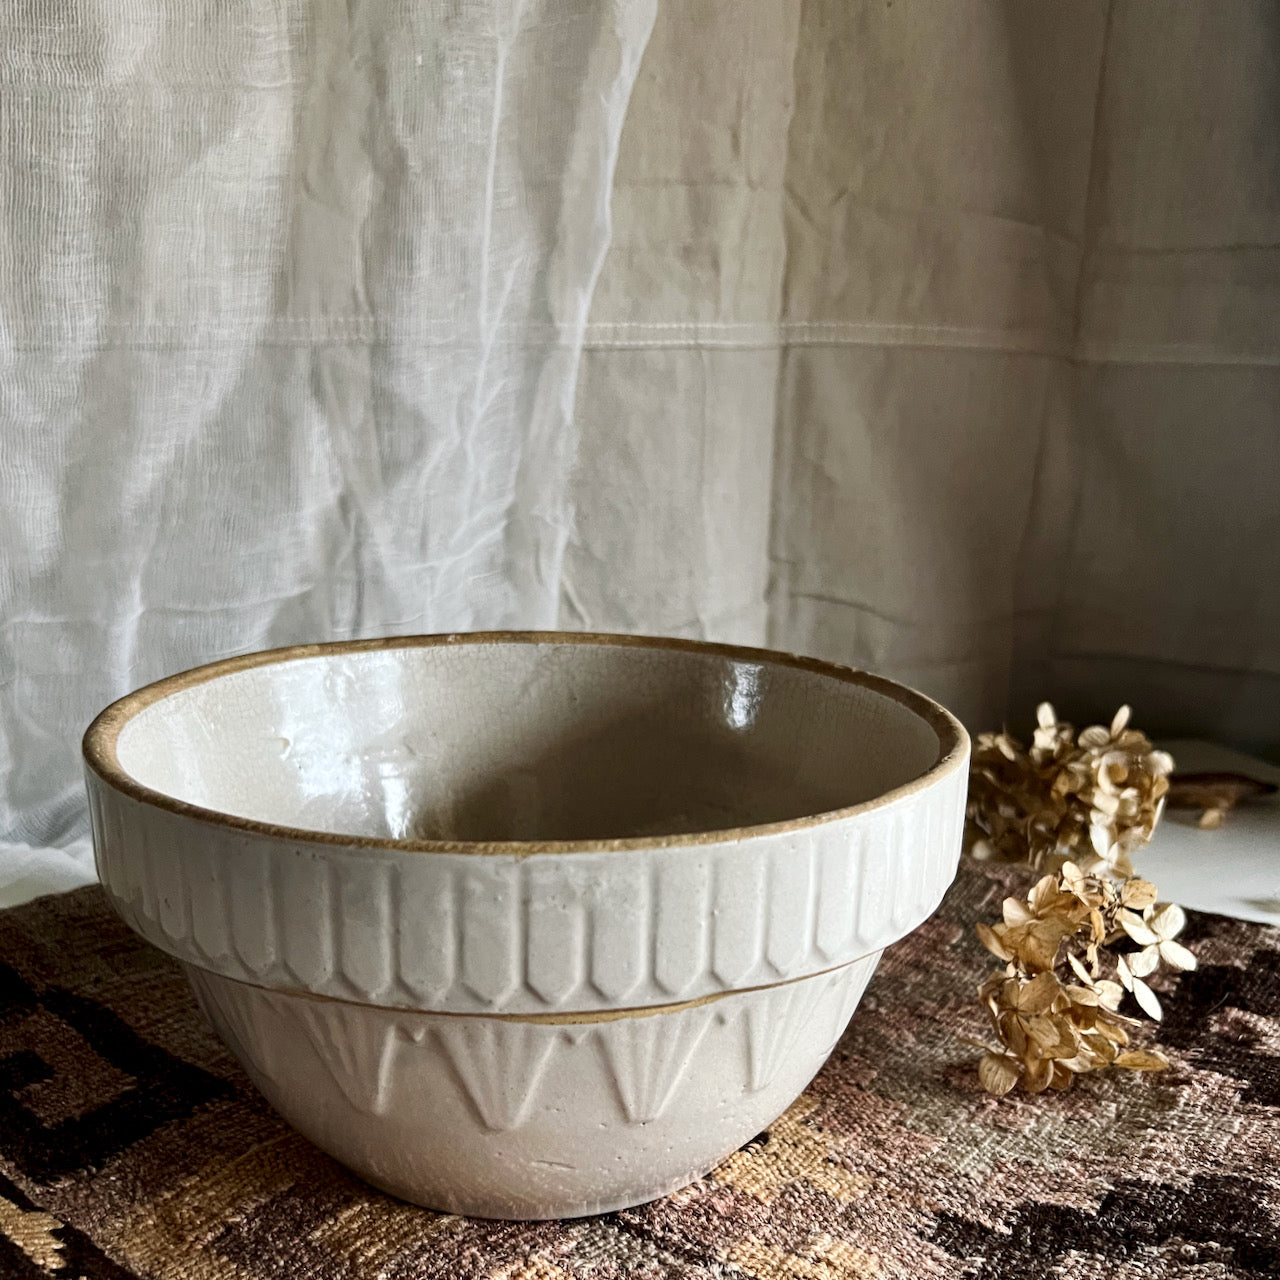 Old White Stoneware Mixing Bowl with Patterned Rim